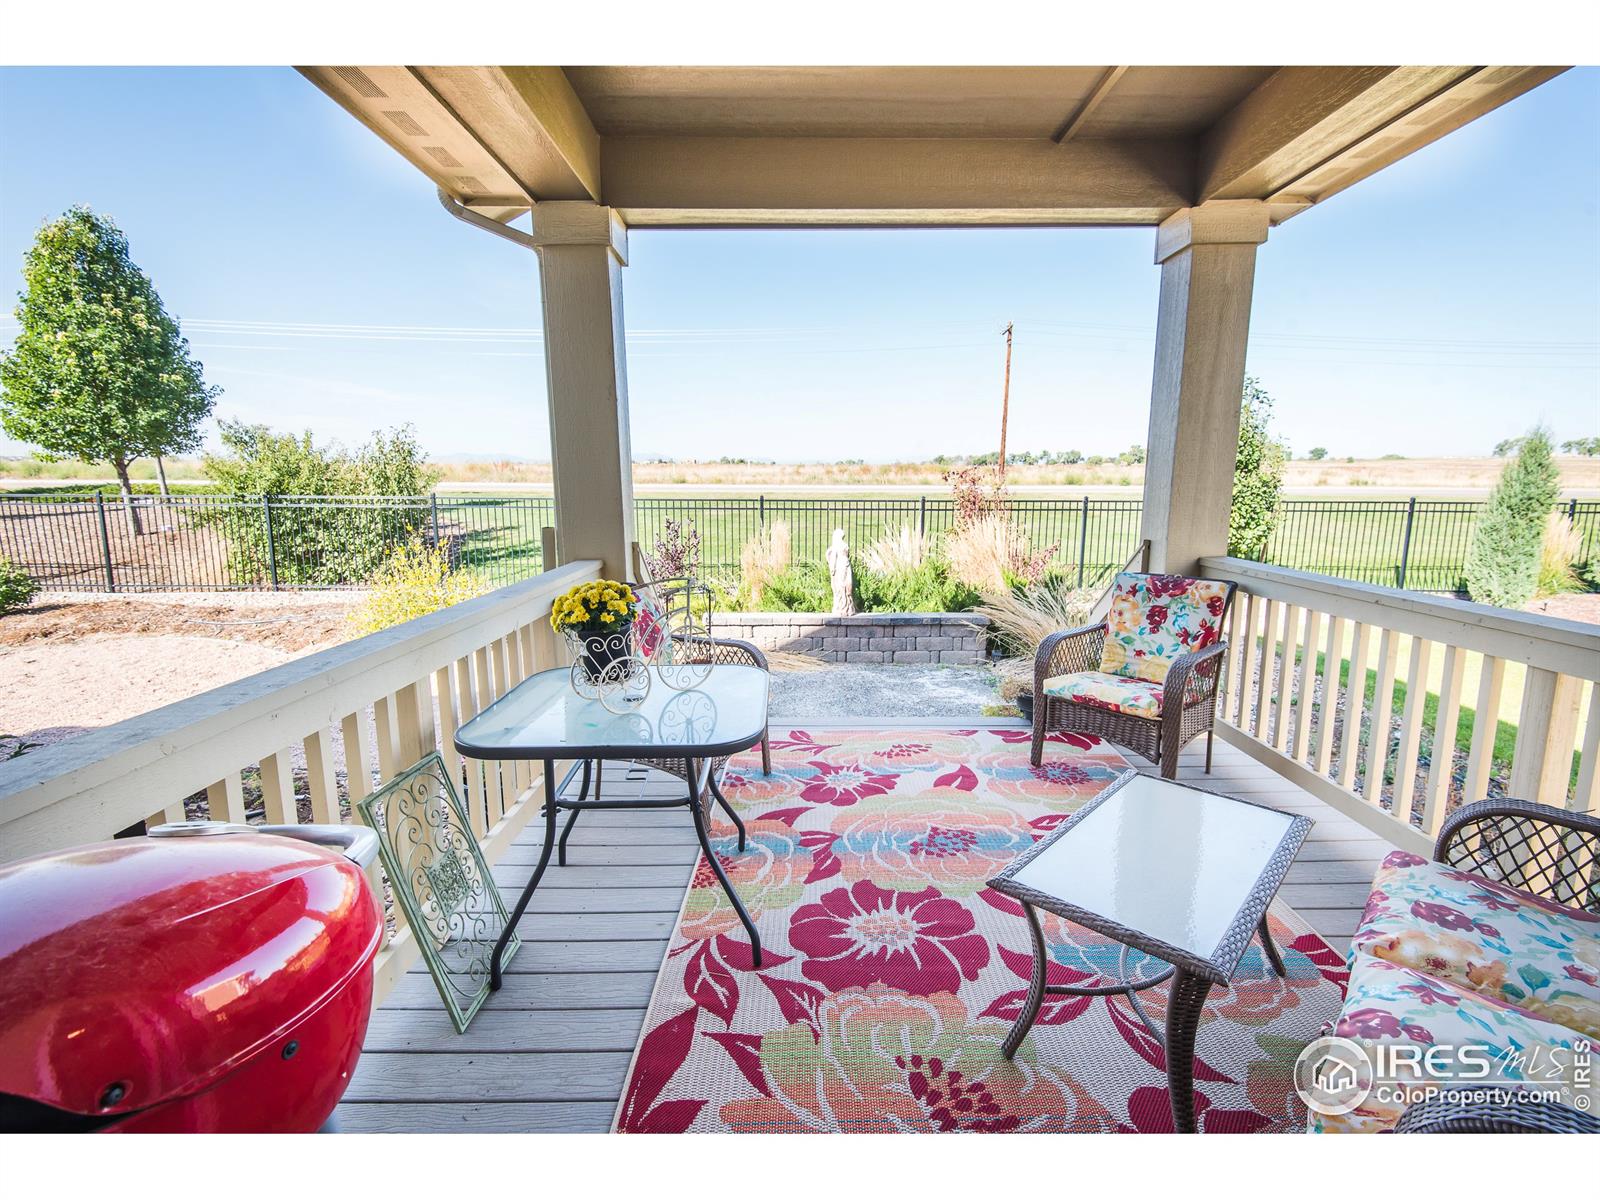 15333 Quince, Thornton, CO